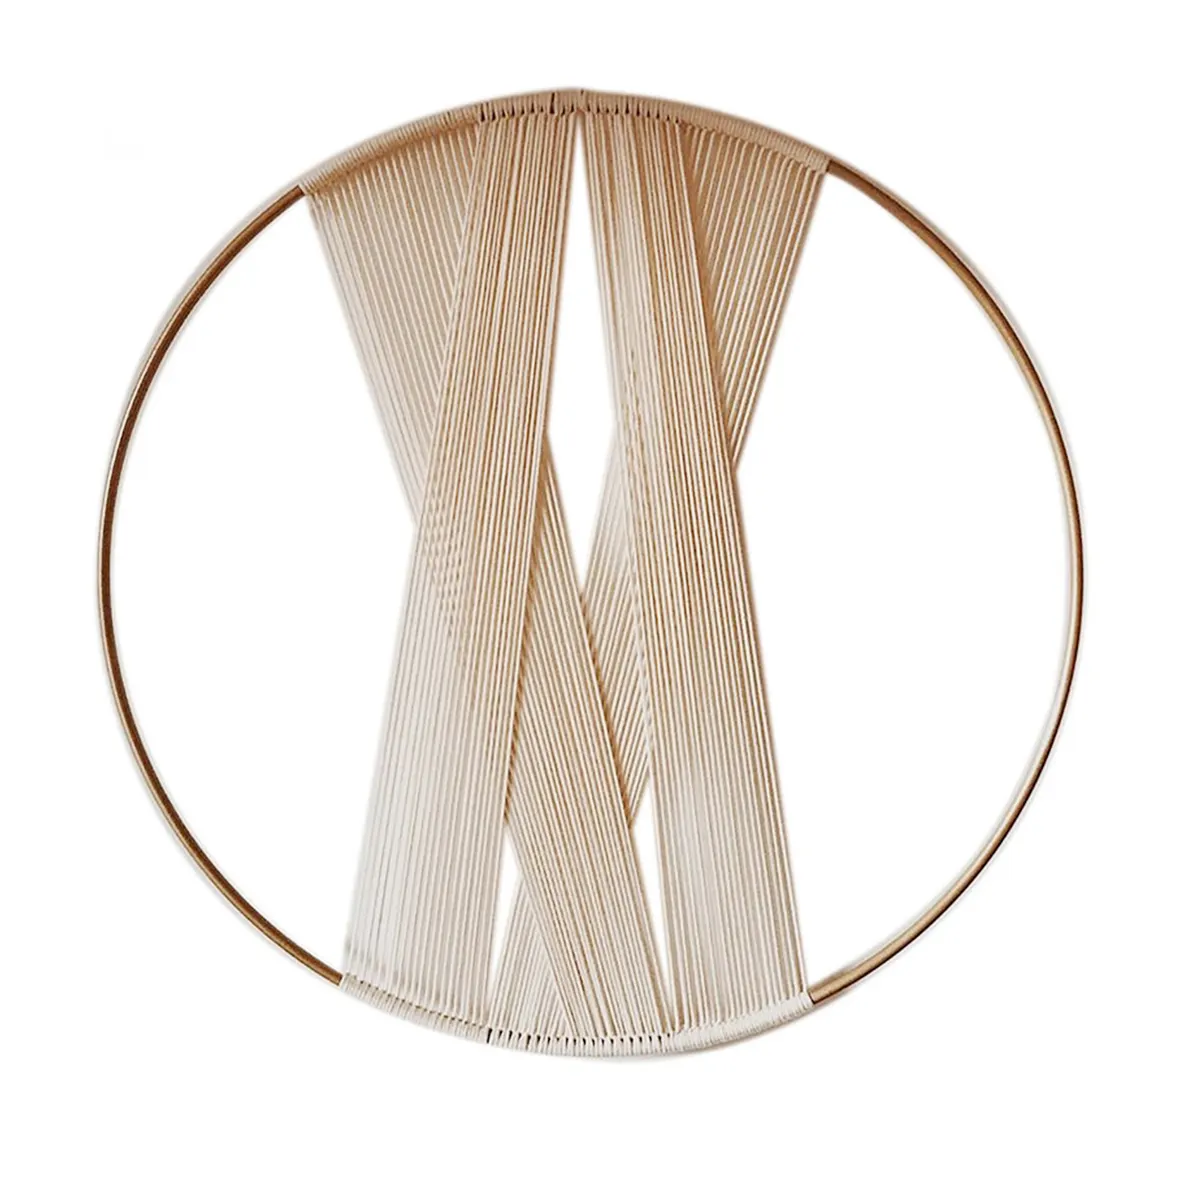 Bohemian Macrame Wall Hanging Creative Round Wall Hanging Minimalism Gold Hoop Cotton Thread Woven Tapestry